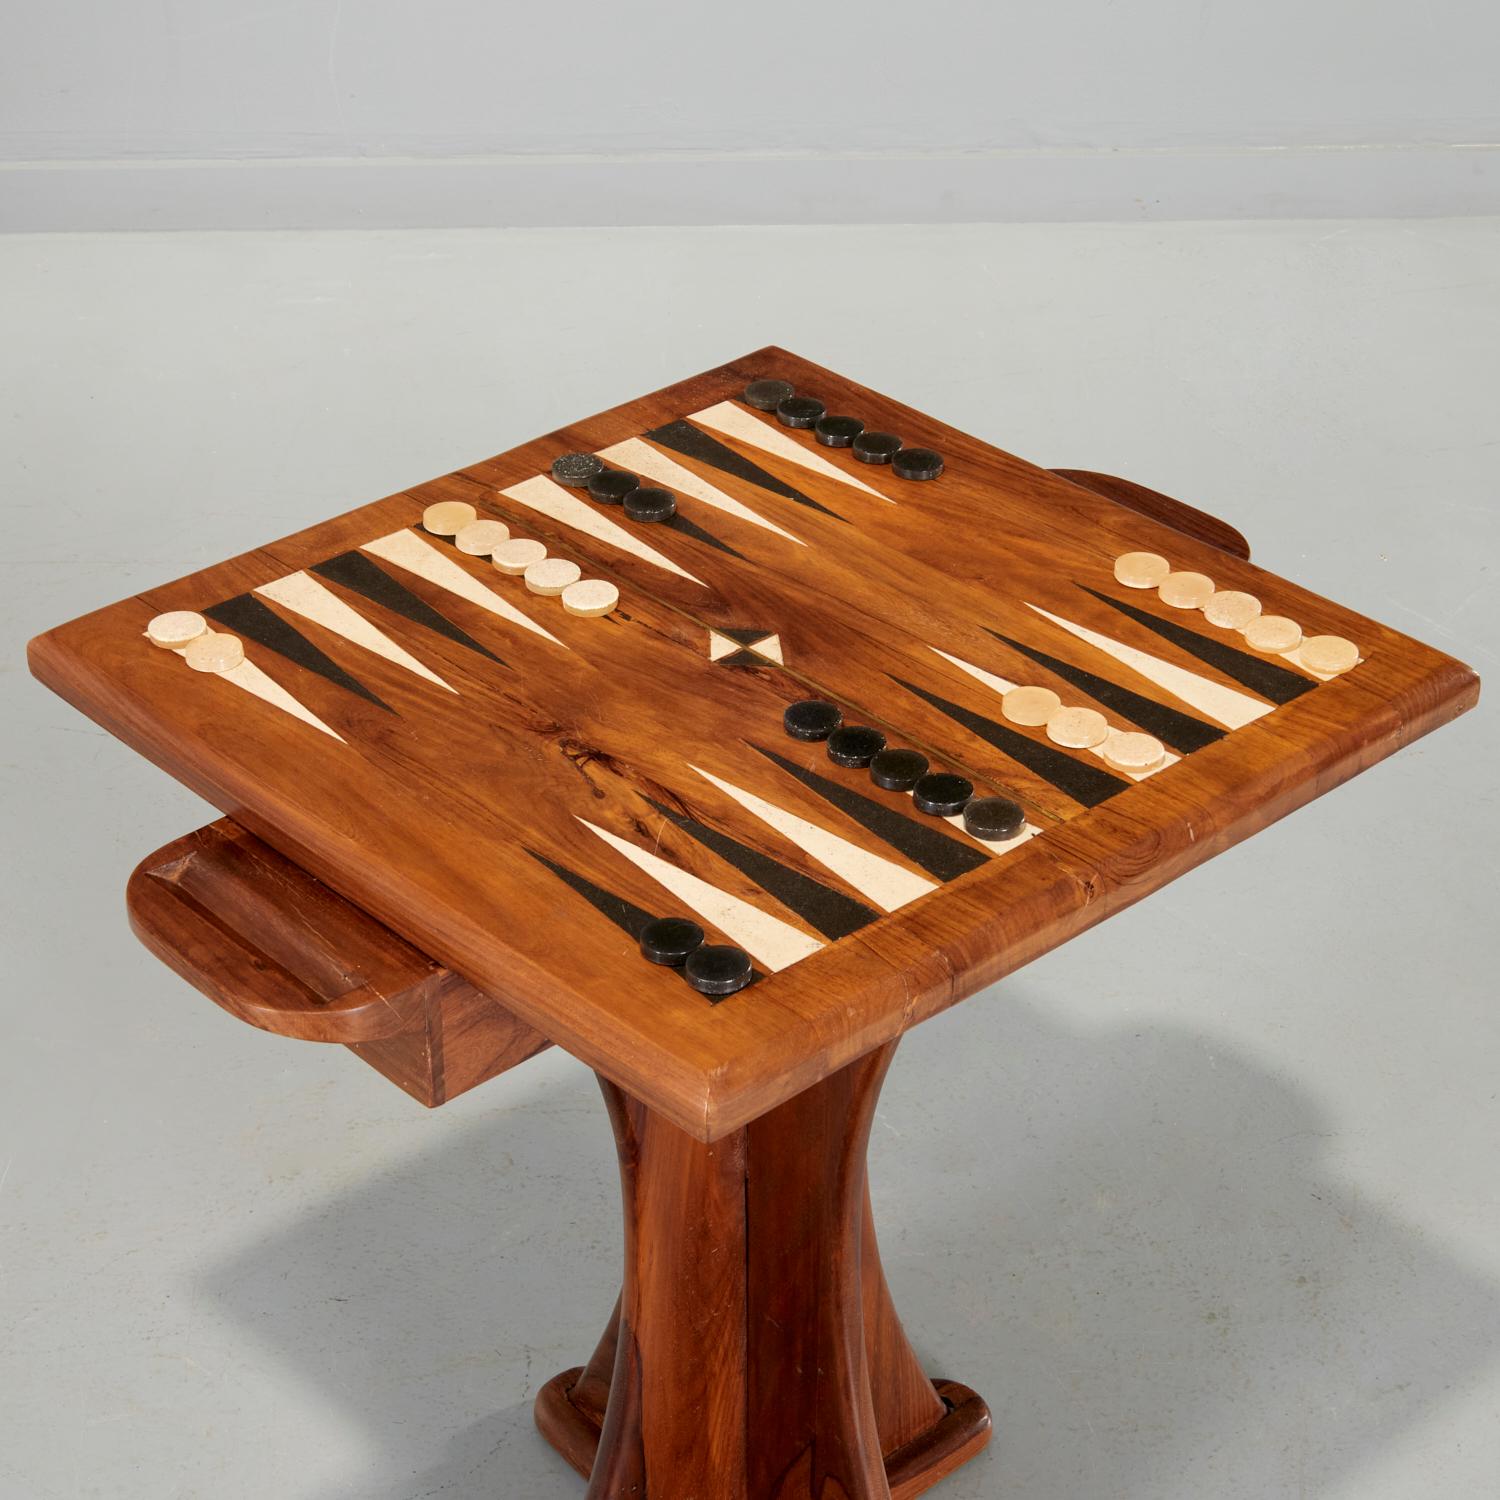 Mid 20th c., In the style of Don Shoemaker furniture: enamel inlaid tropical wood, the rectangular top on cruciform pedestal, with long two sided drawer. This piece retains the original 30 backgammon tiles with matching enamel surface. I love this